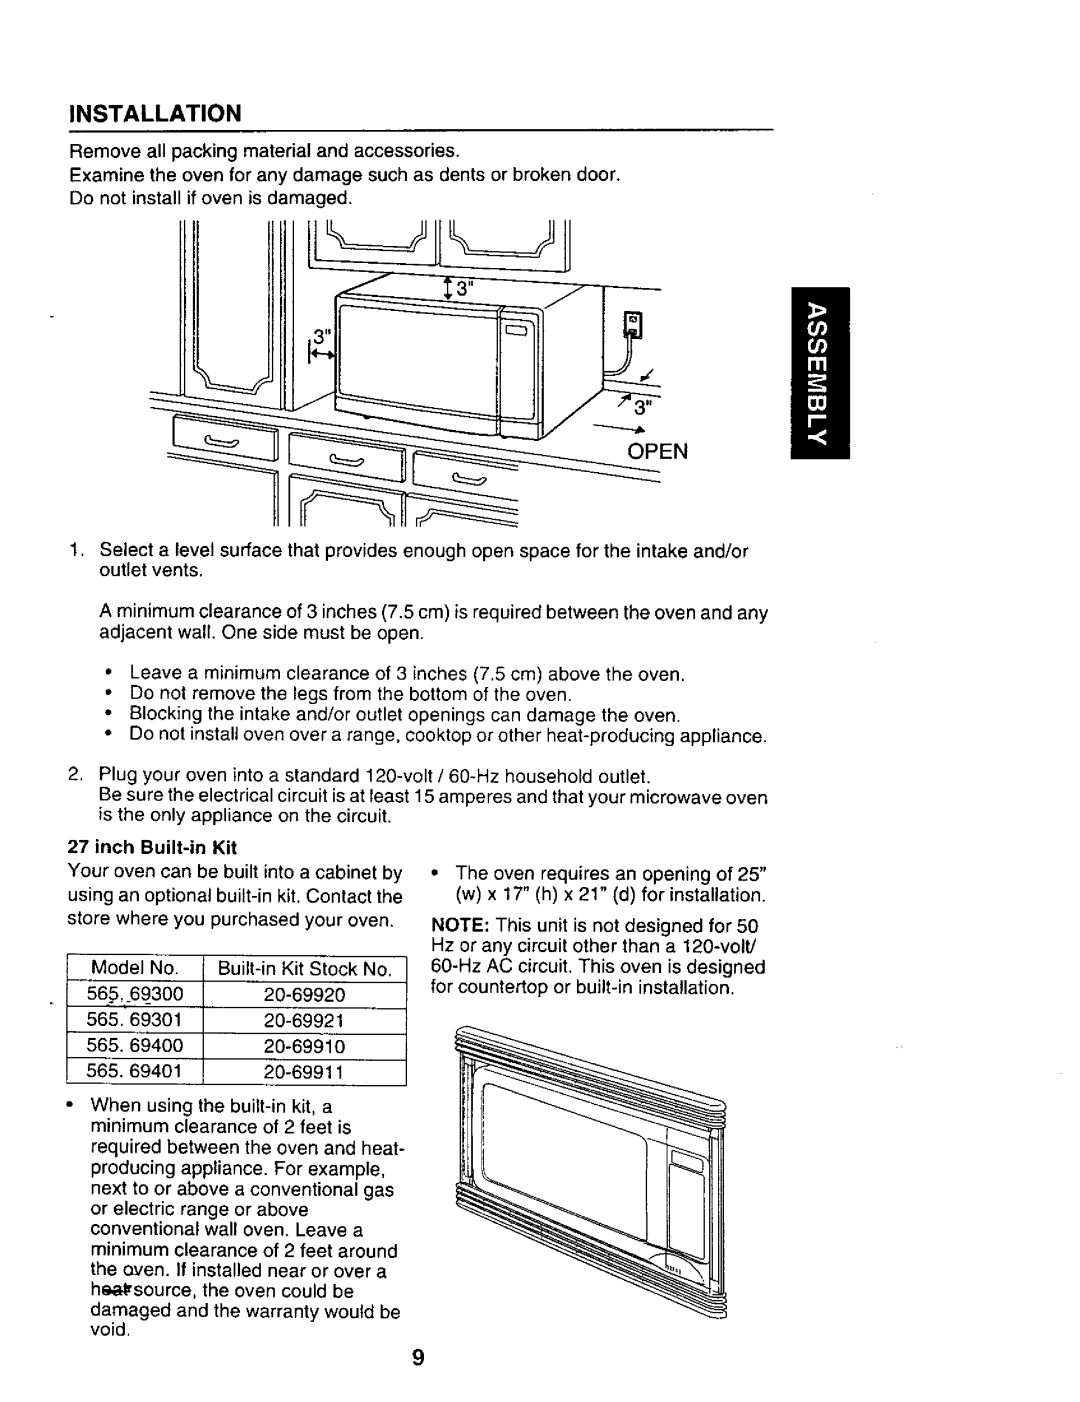 Sears 565.69301, 565.69401 owner manual Installation, The oven requires an opening of, wx 17 h x 21 d for installation 